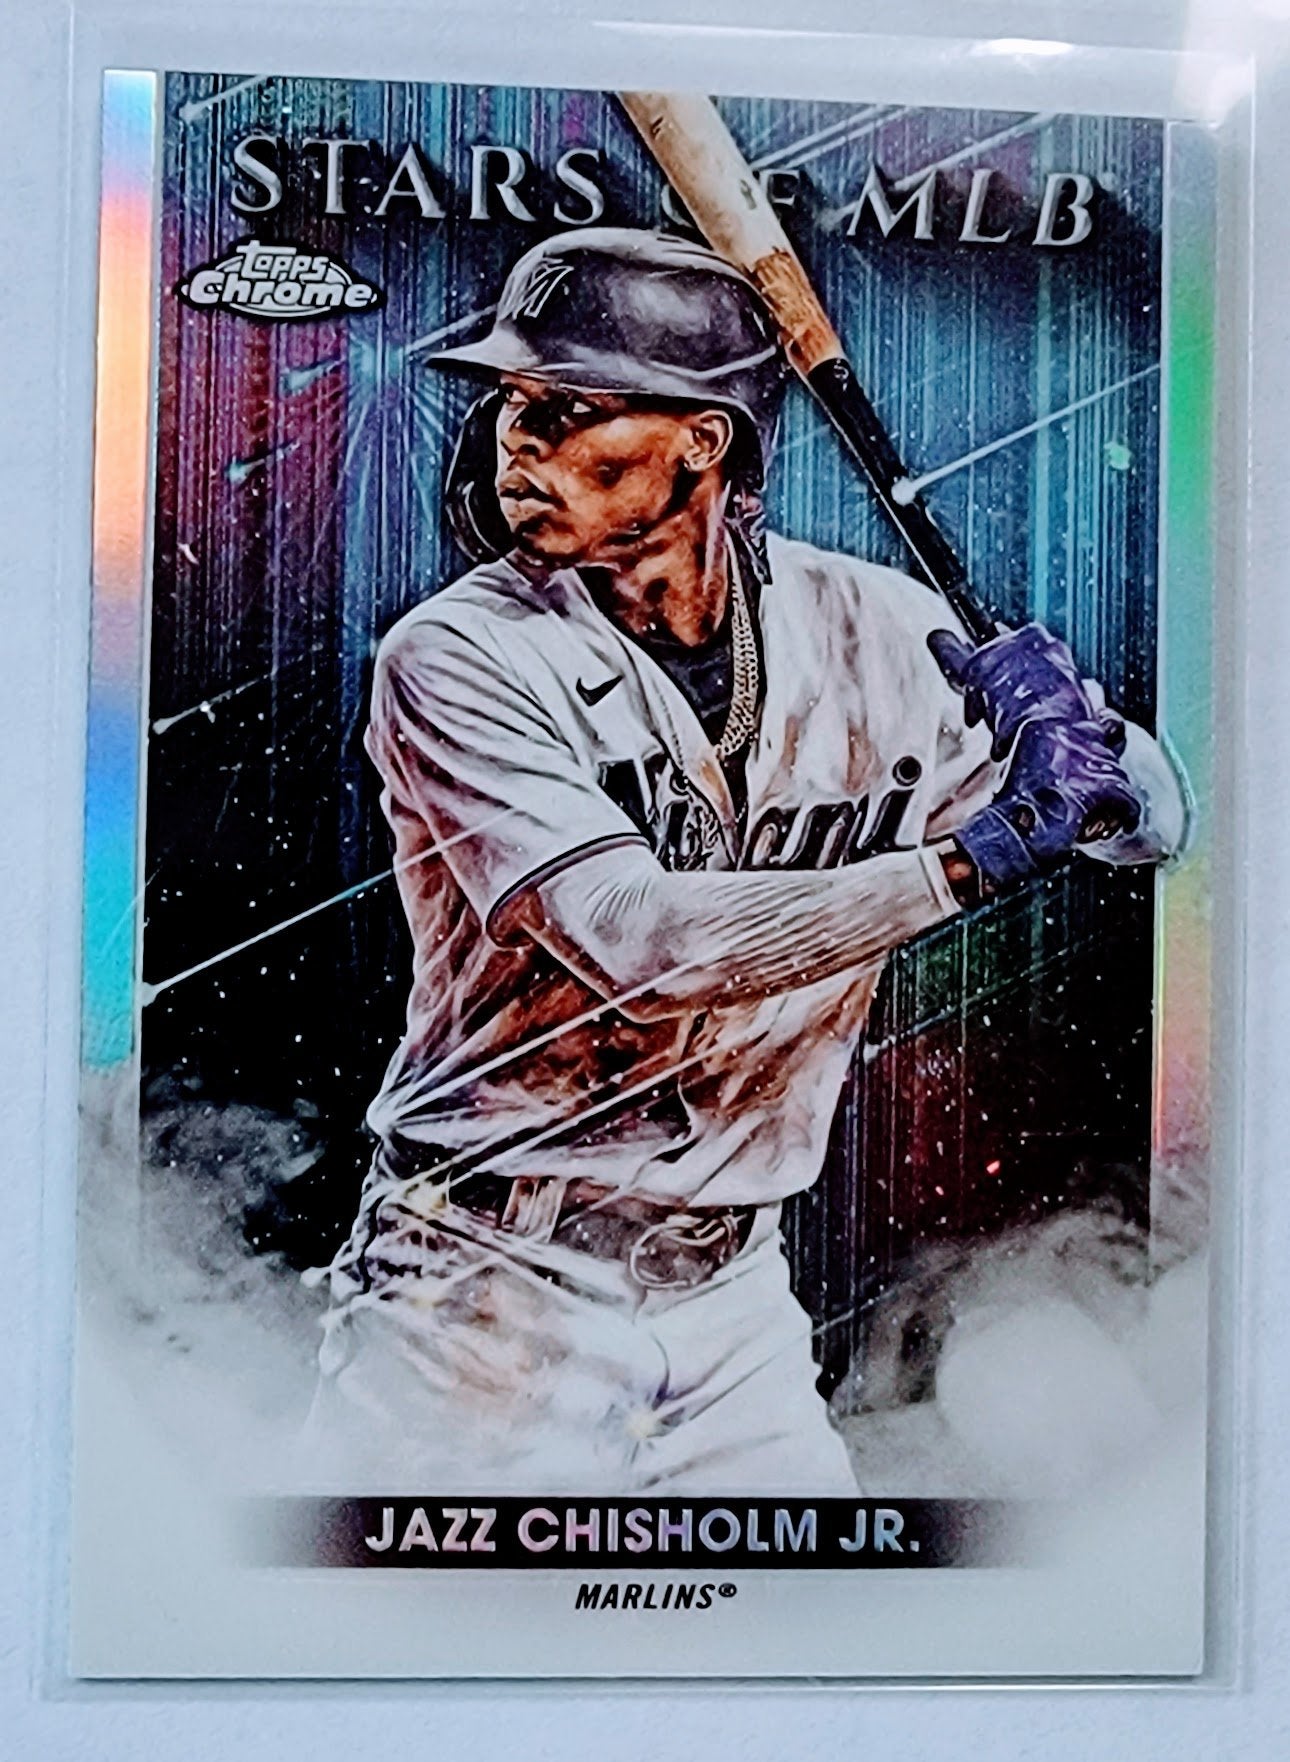 2022 Topps Jazz Chisolm Stars of the MLB Foil Refractor Baseball Card AVM1 simple Xclusive Collectibles   